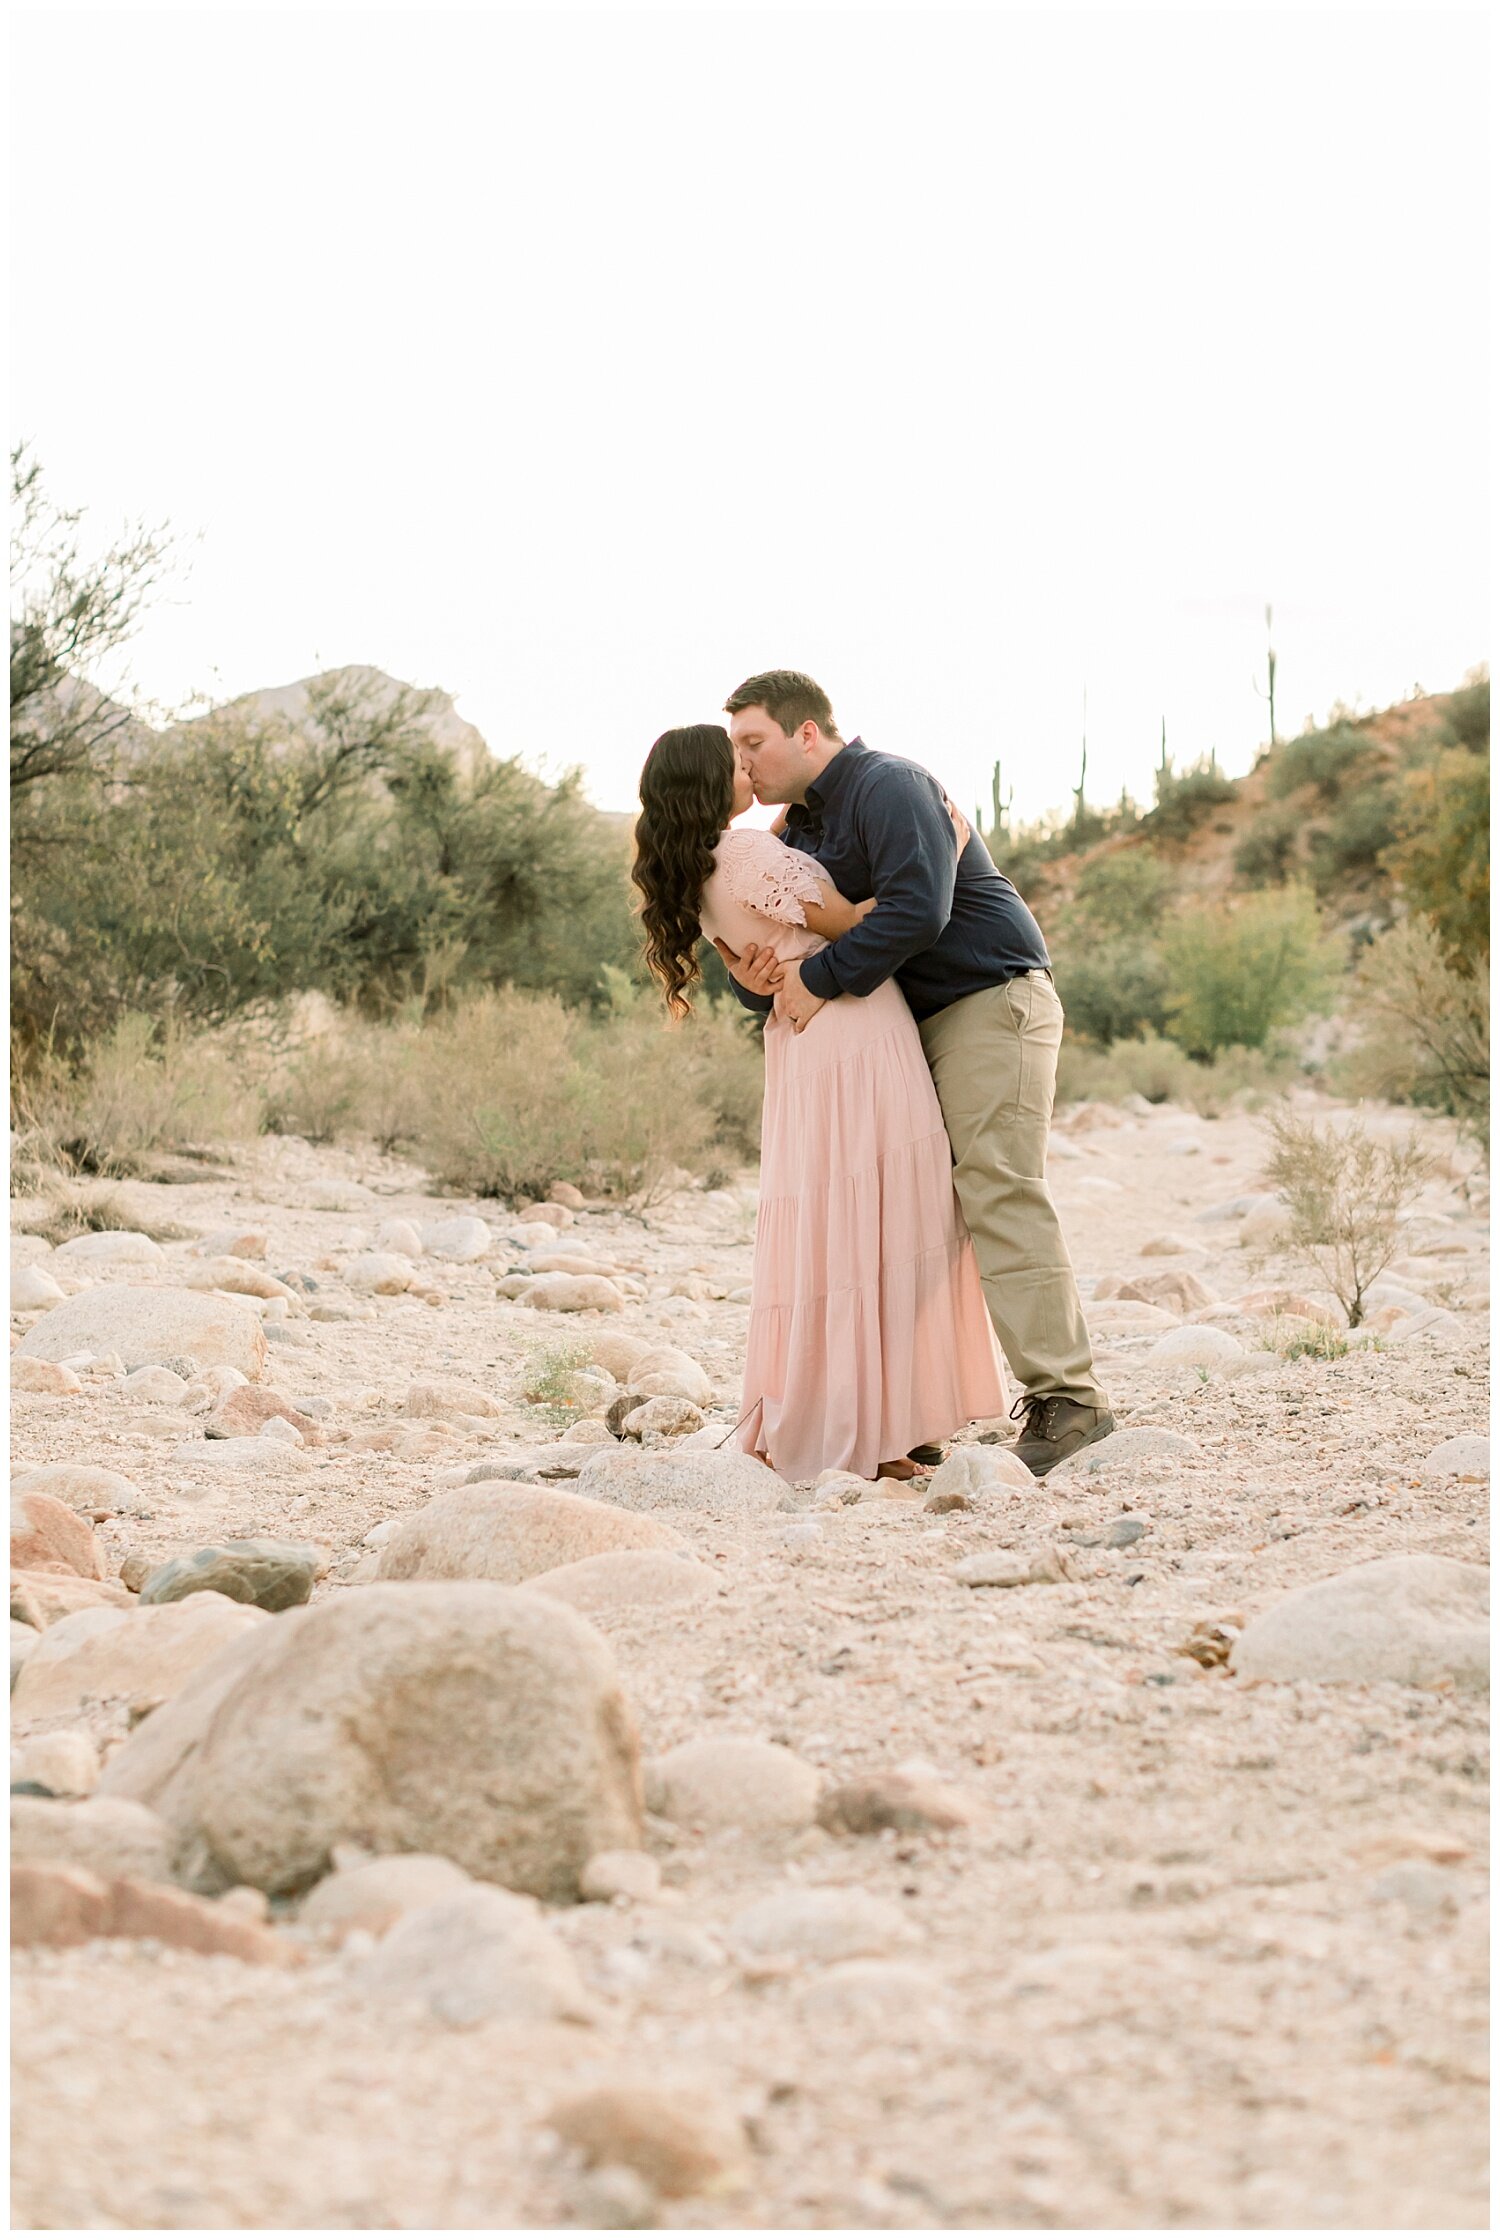 Engagement Photos at Catalina State Park by Tucson Wedding Photographers.